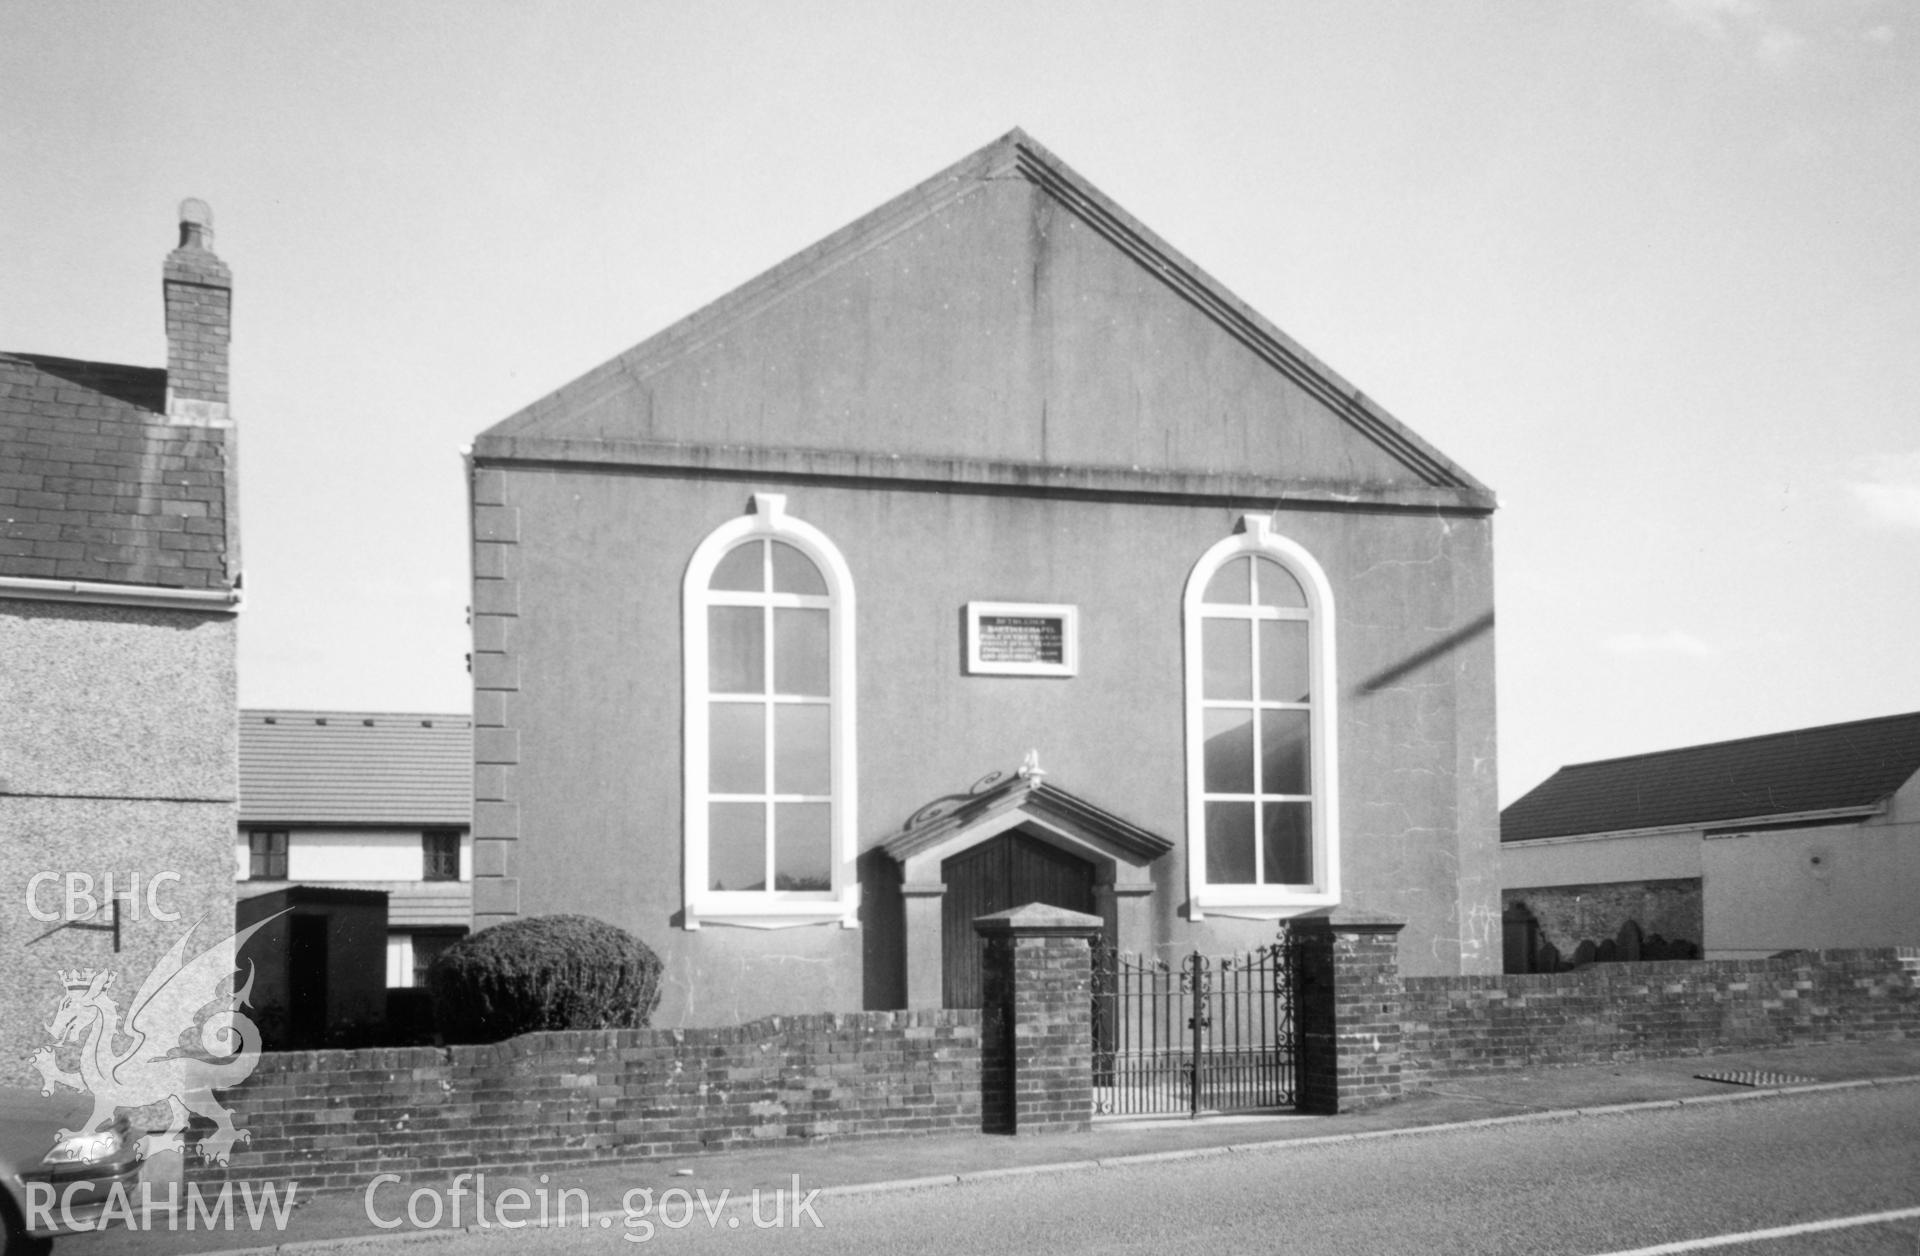 Digital copy of a black and white photograph showing an exterior view of Bethlehem Baptist Chapel, Porthyrhyd, taken by Robert Scourfield, c.1996.